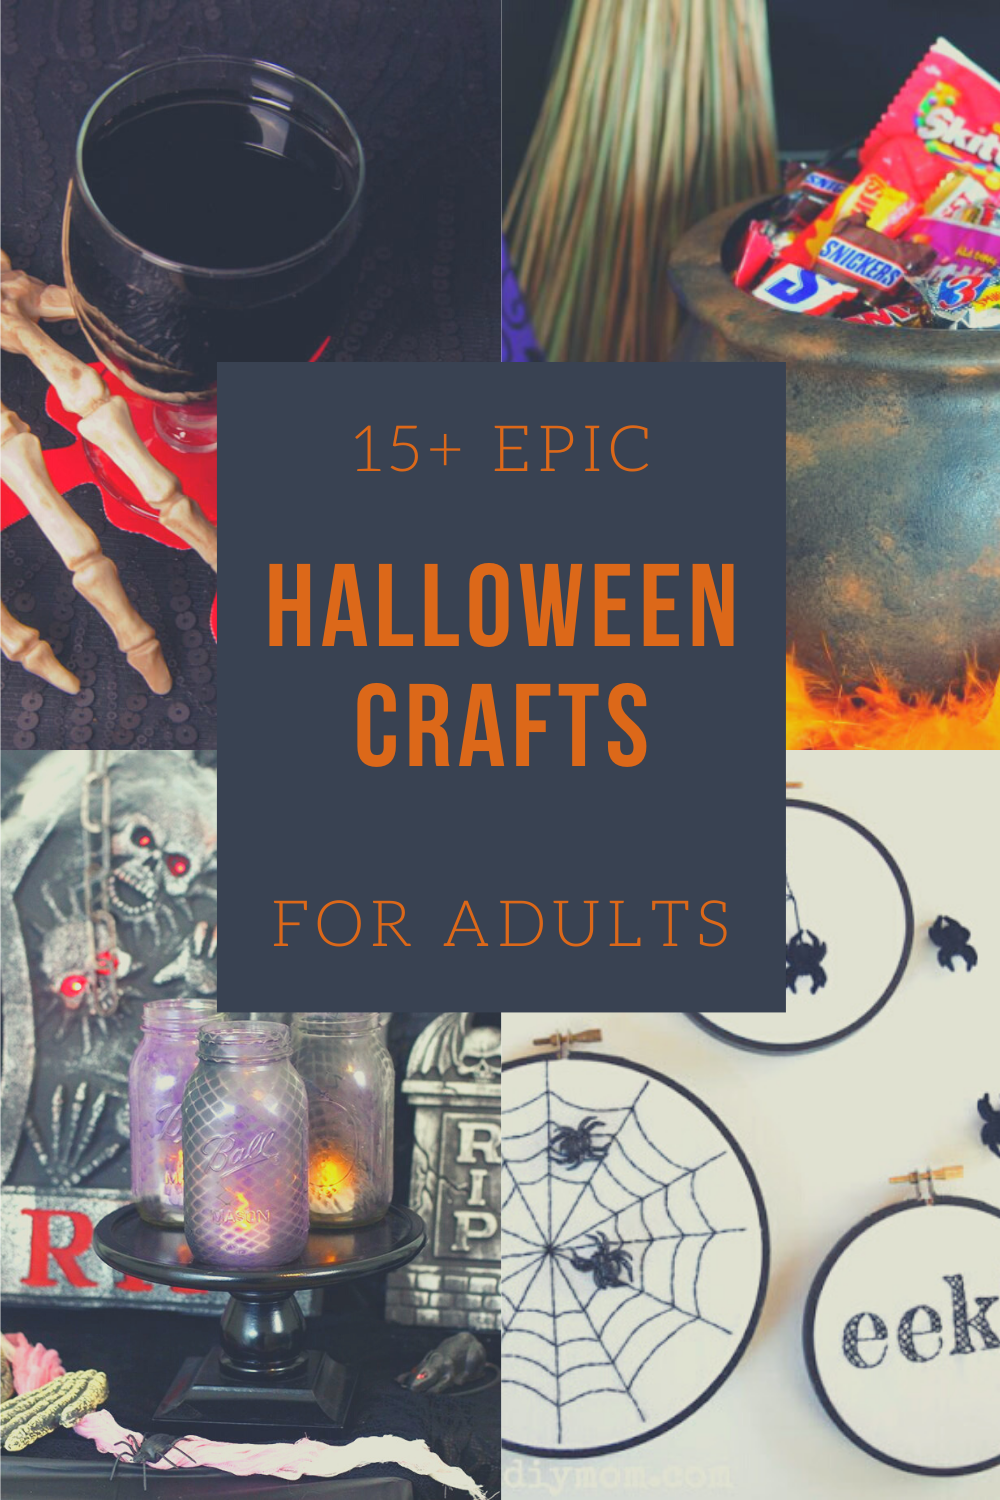 20 Amazing Halloween crafts that are perfect for adults or older kids.